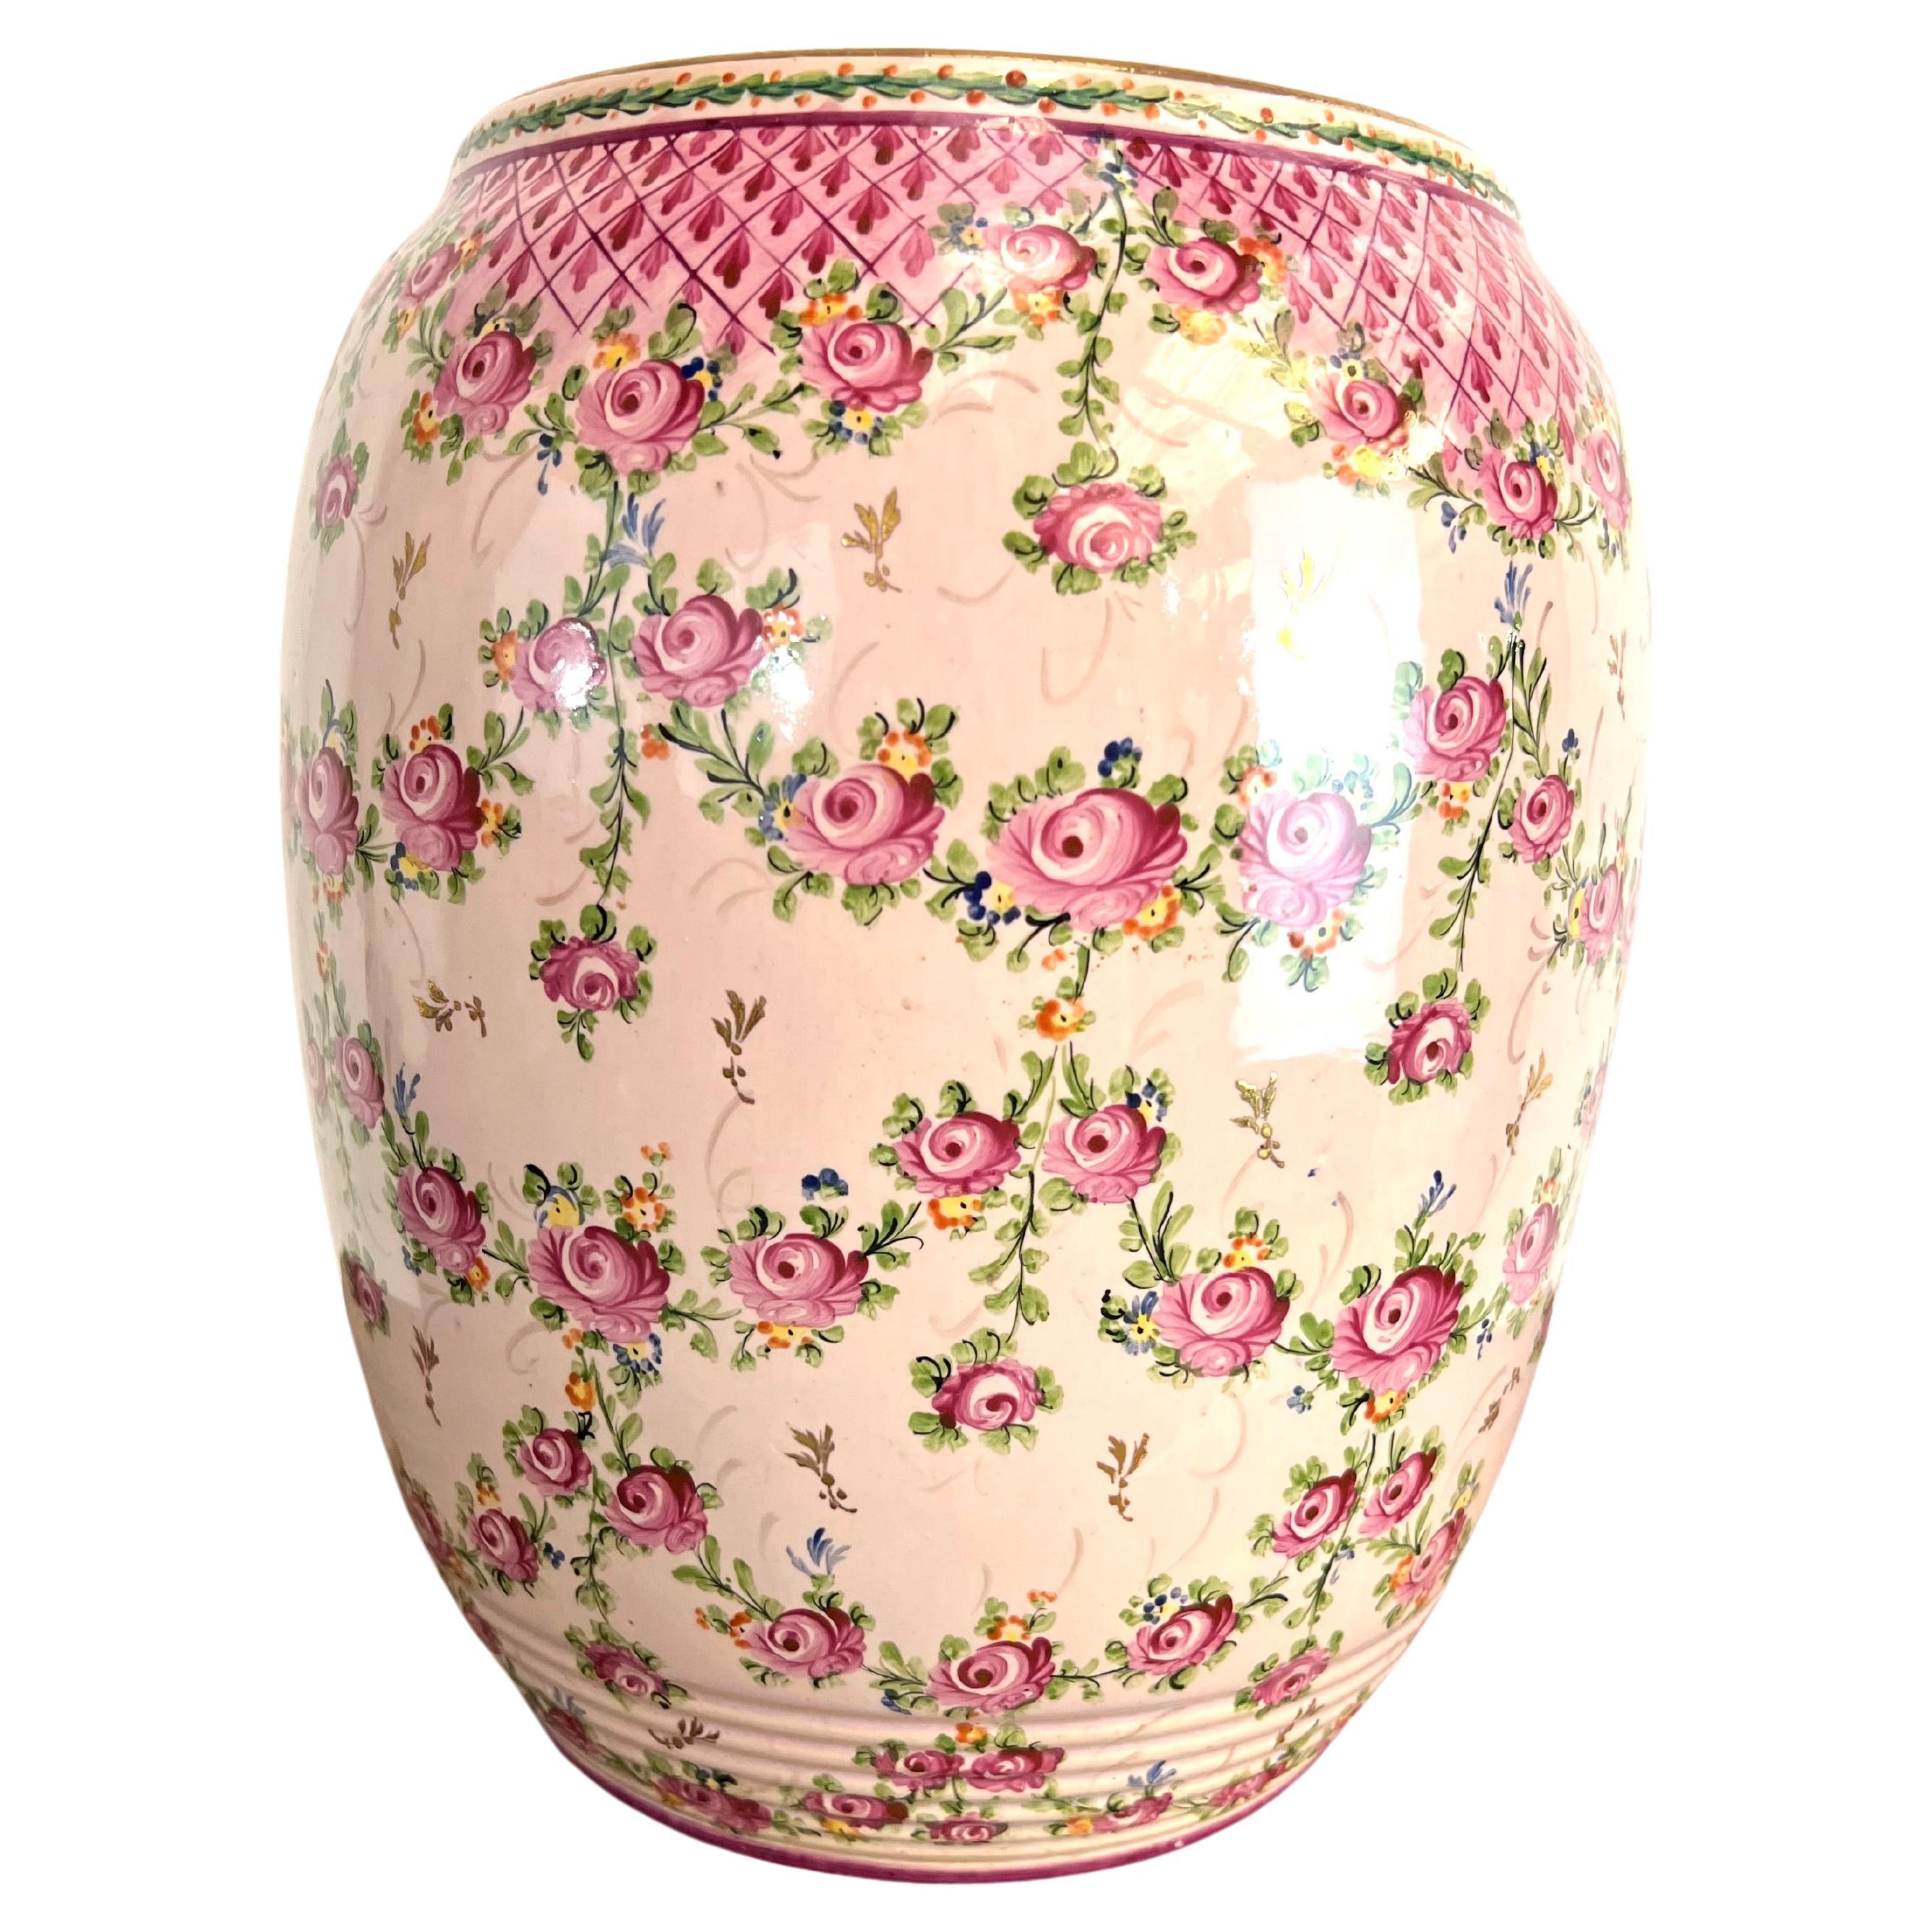 Pink vase with rose decor in faience of Clamecy